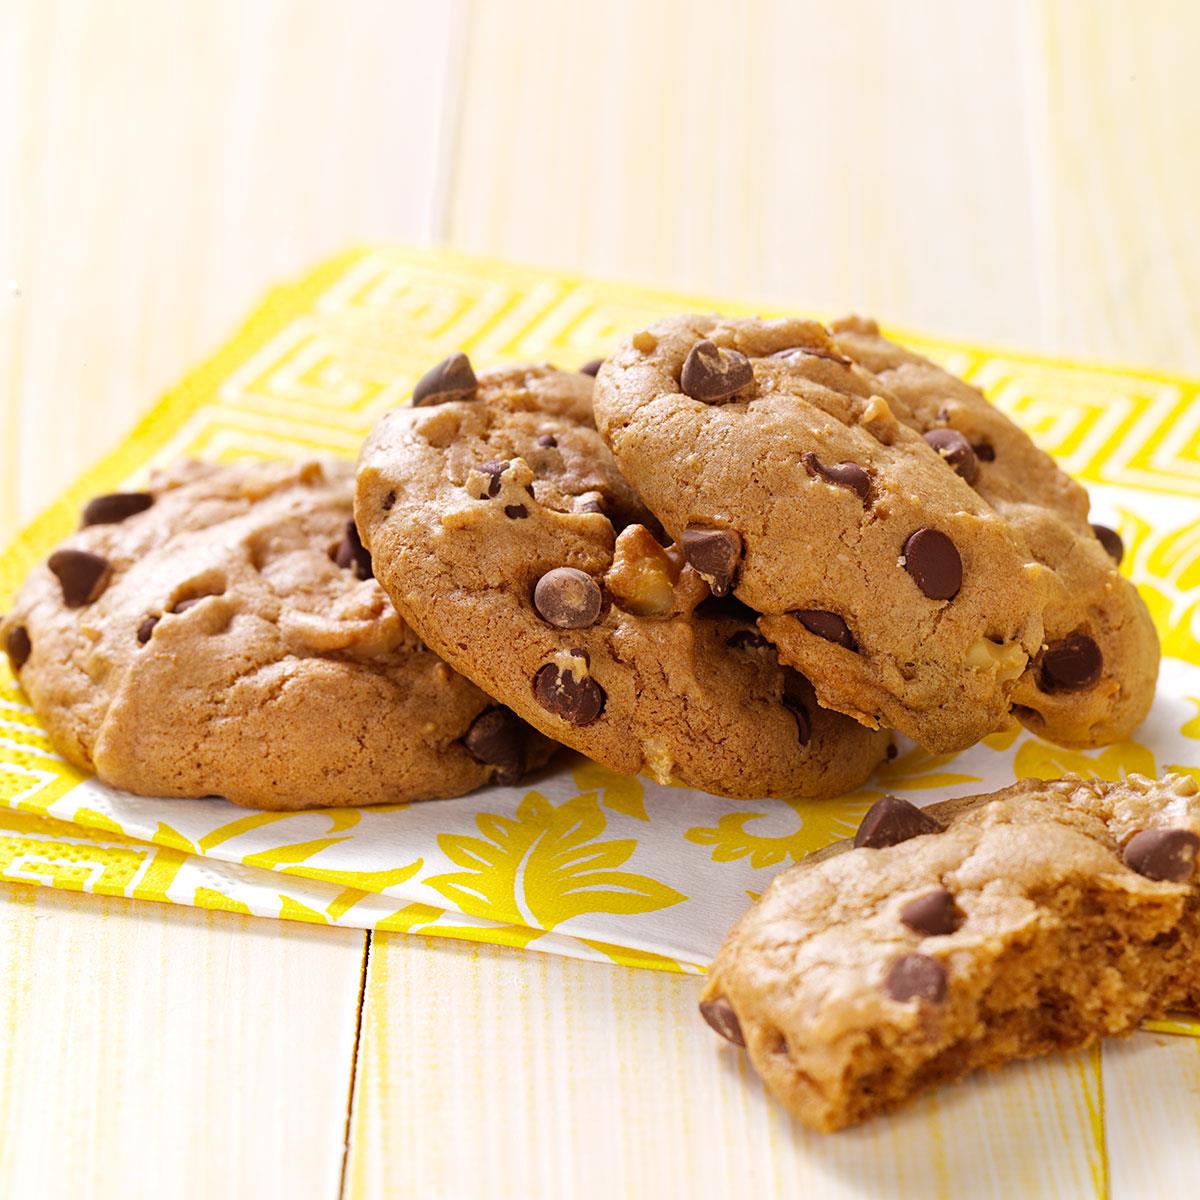 How To Make Chocolate Chip Cookies From Scratch